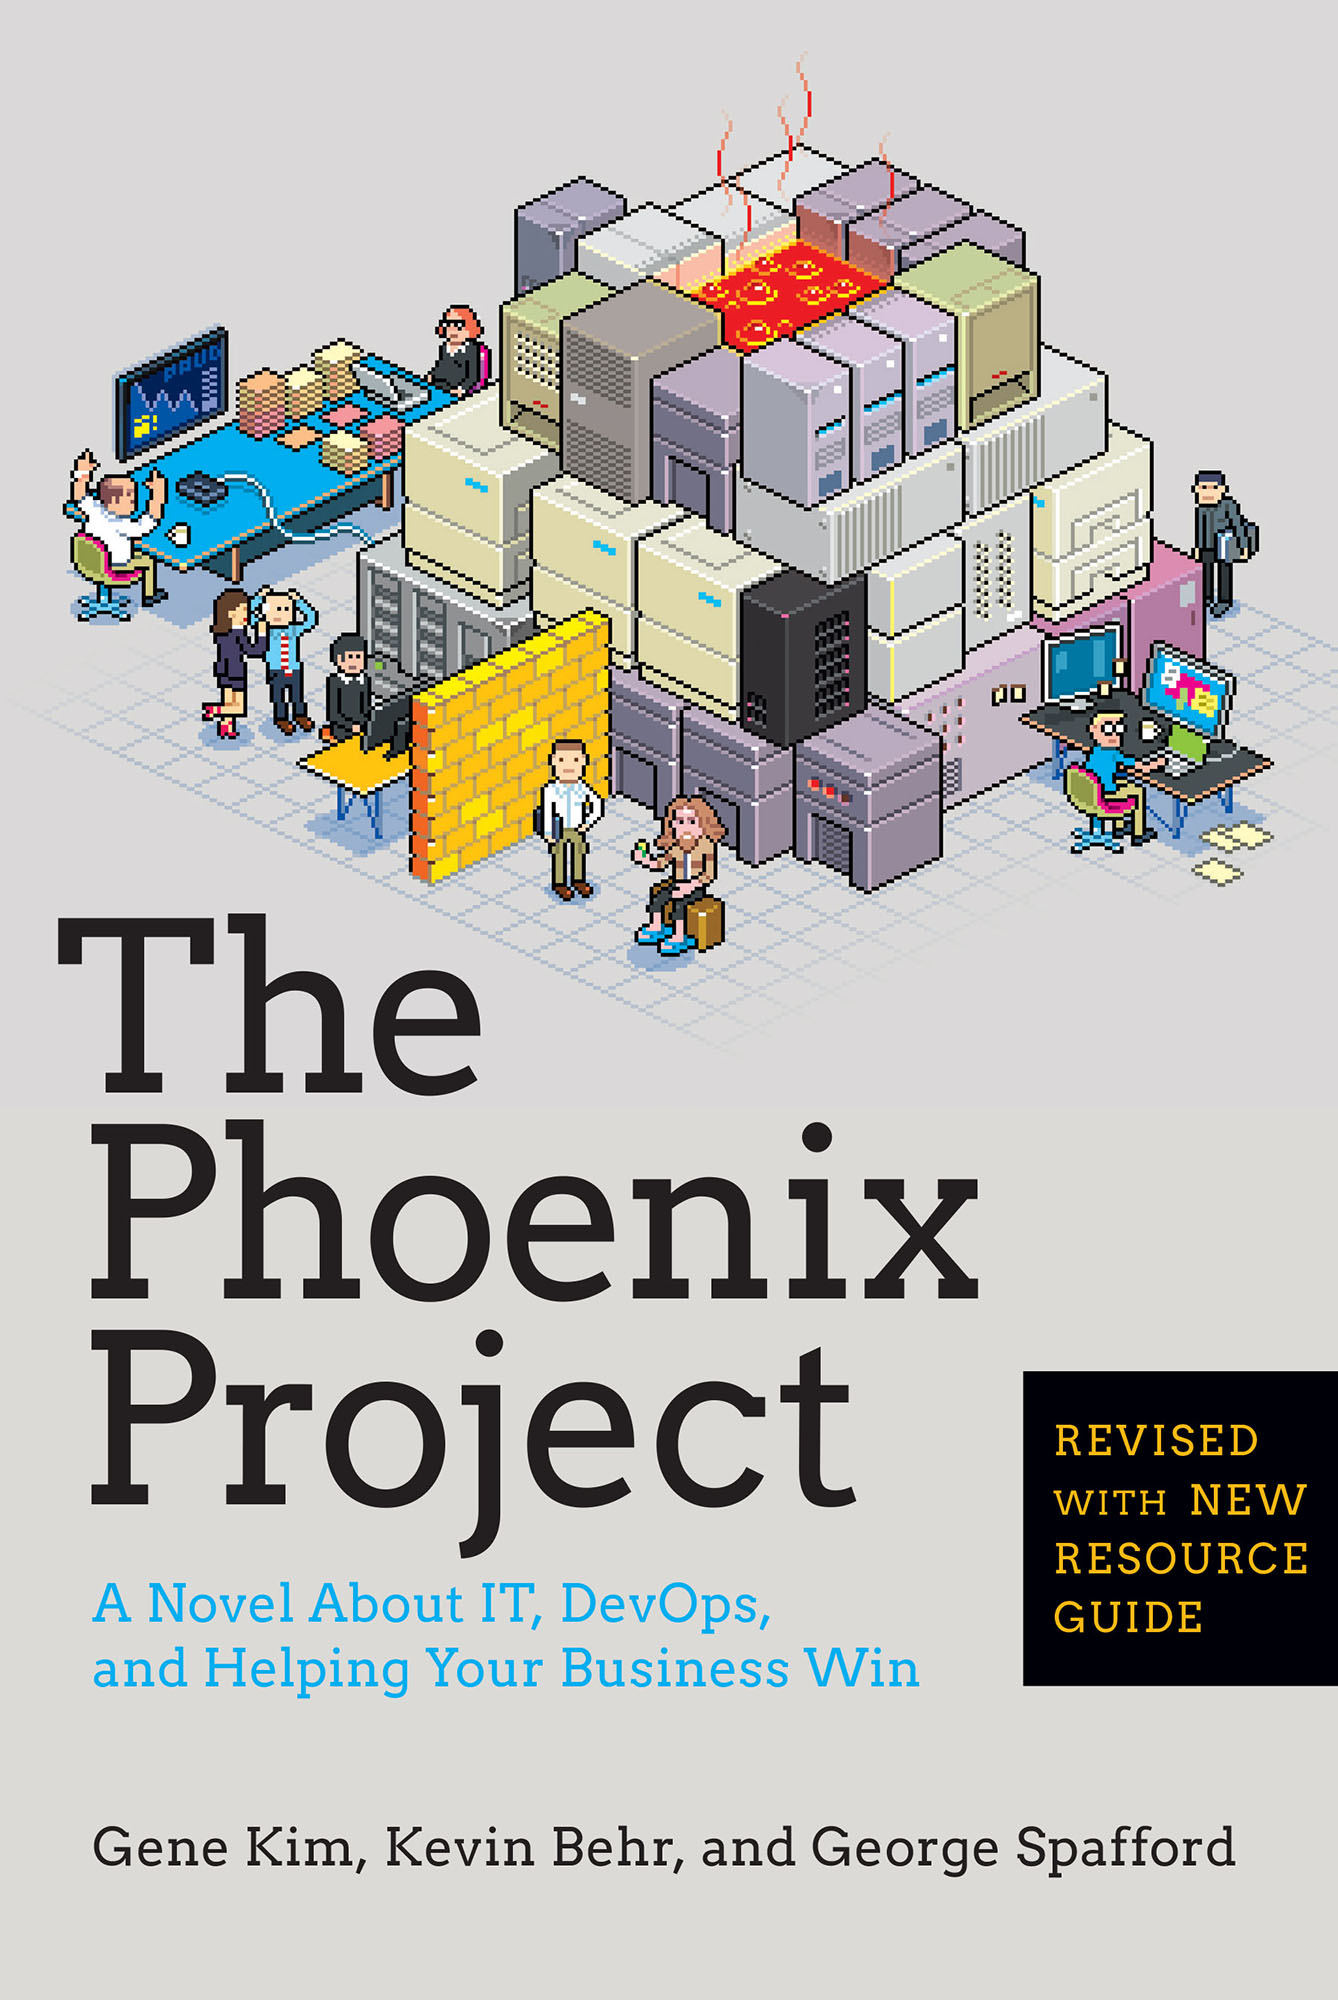 From the authors of The Visible Ops Handbook comes The Phoenix Project. A novel about IT, devOps, and Helping Your Business Win by Gene Kim, Keven Behr, and George Spafford